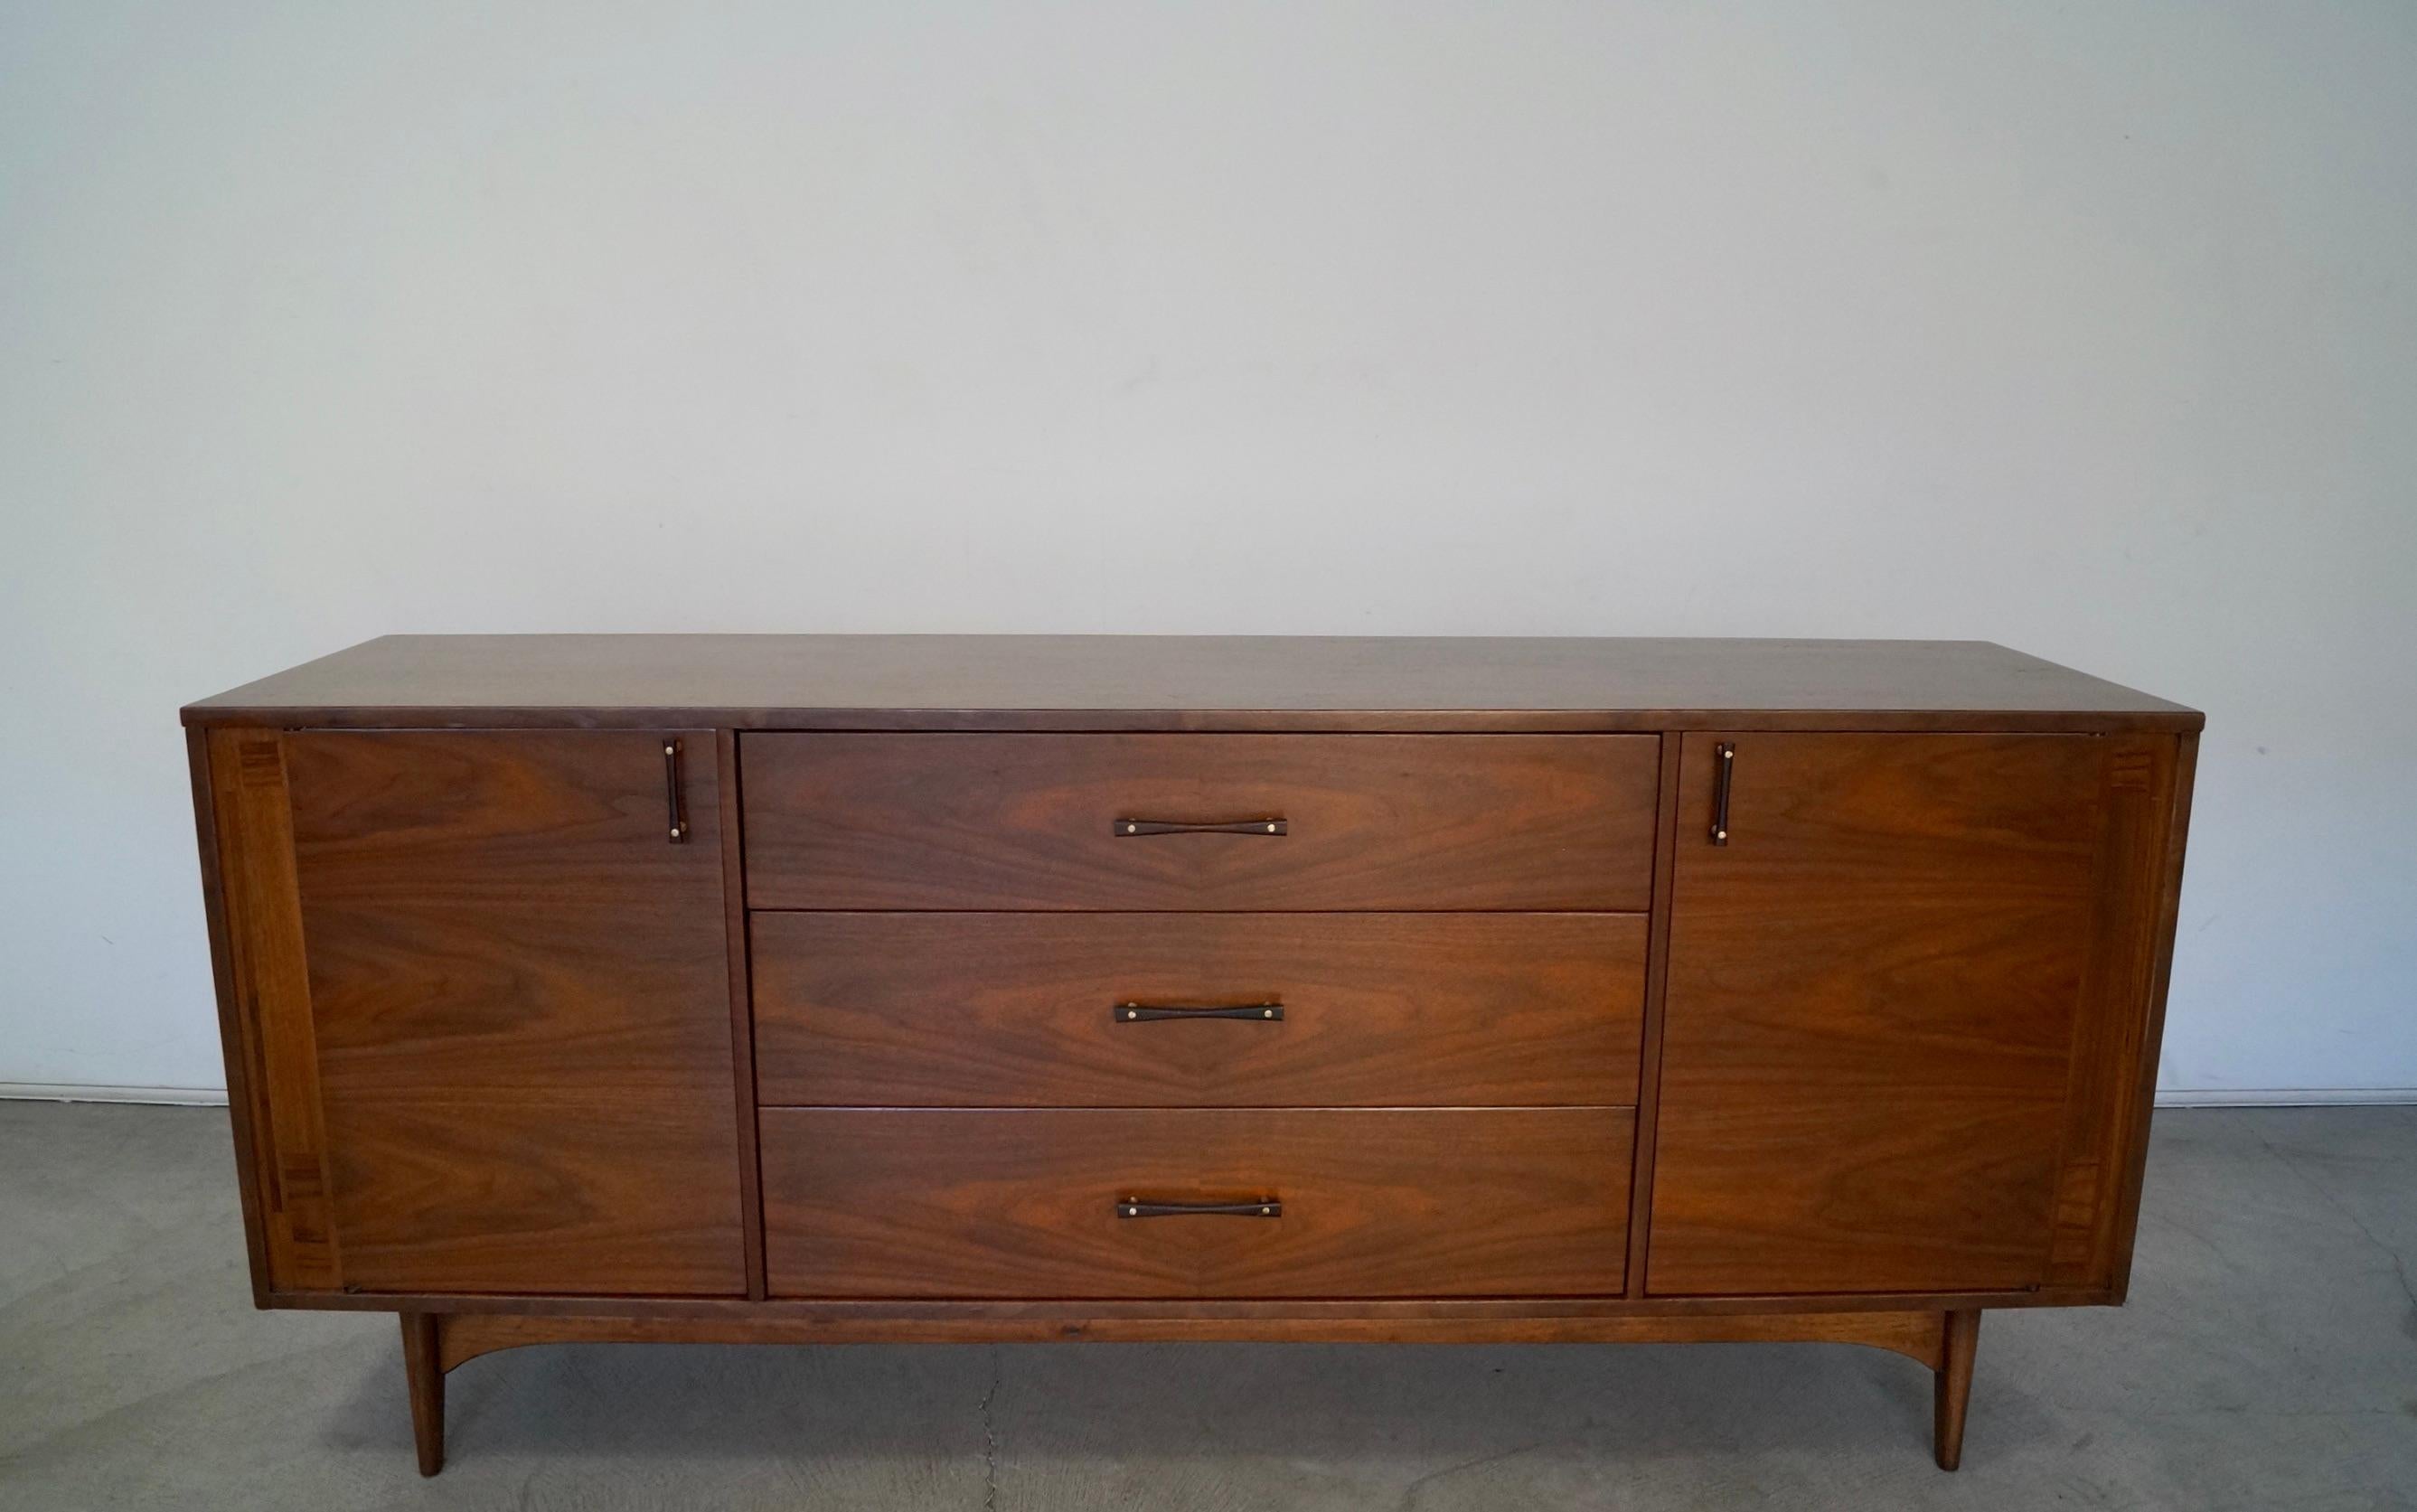 Vintage Mid-Century Modern credenza for sale. Manufactured in the 1960's by Kroehler, and has been professionally refinished. It's made of walnut and rosewood, and is a rare design by Kroehler. It has two credenza doors that open up to four drawers